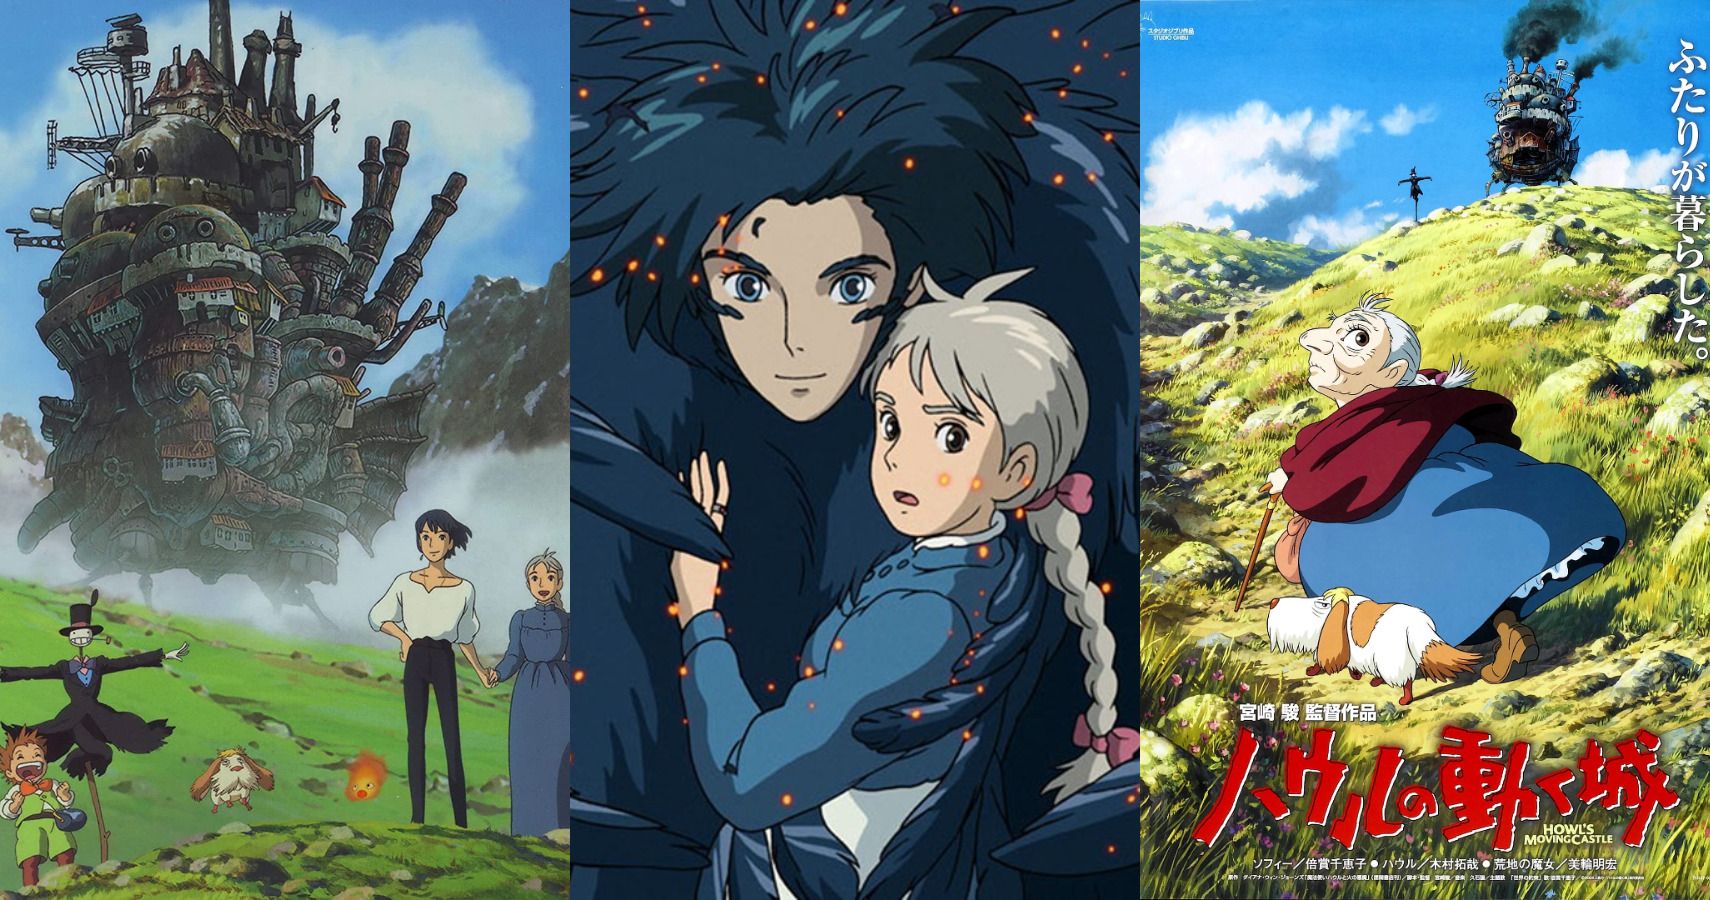 Studio Ghibli Is Making A 'Real Life' Howl's Moving Castle